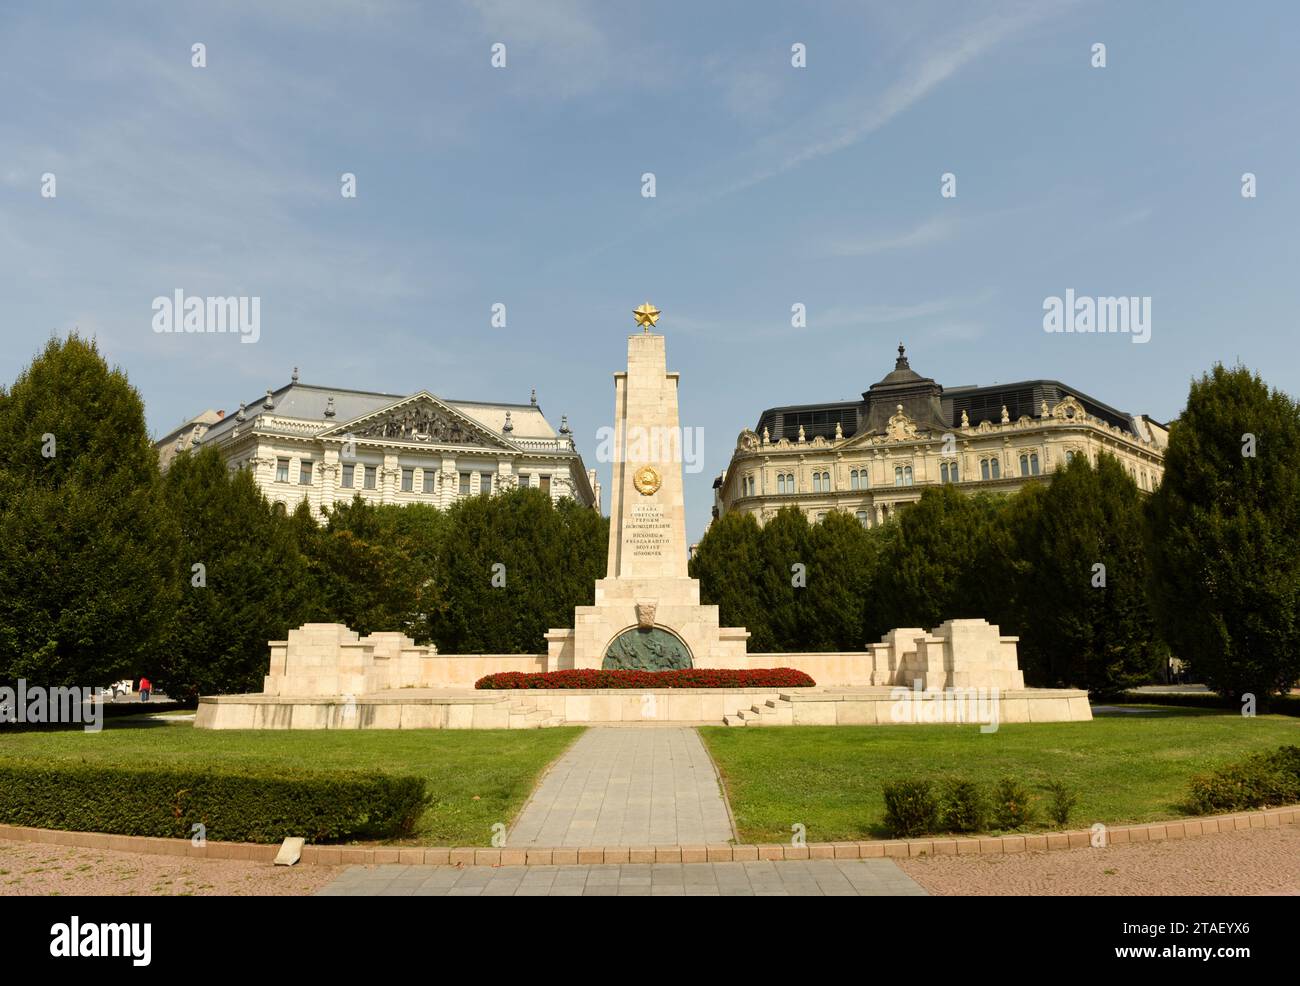 Budapest, Hungary - August 30, 2018: Soviet War Memorial on Liberty Square in Budapest. Stock Photo